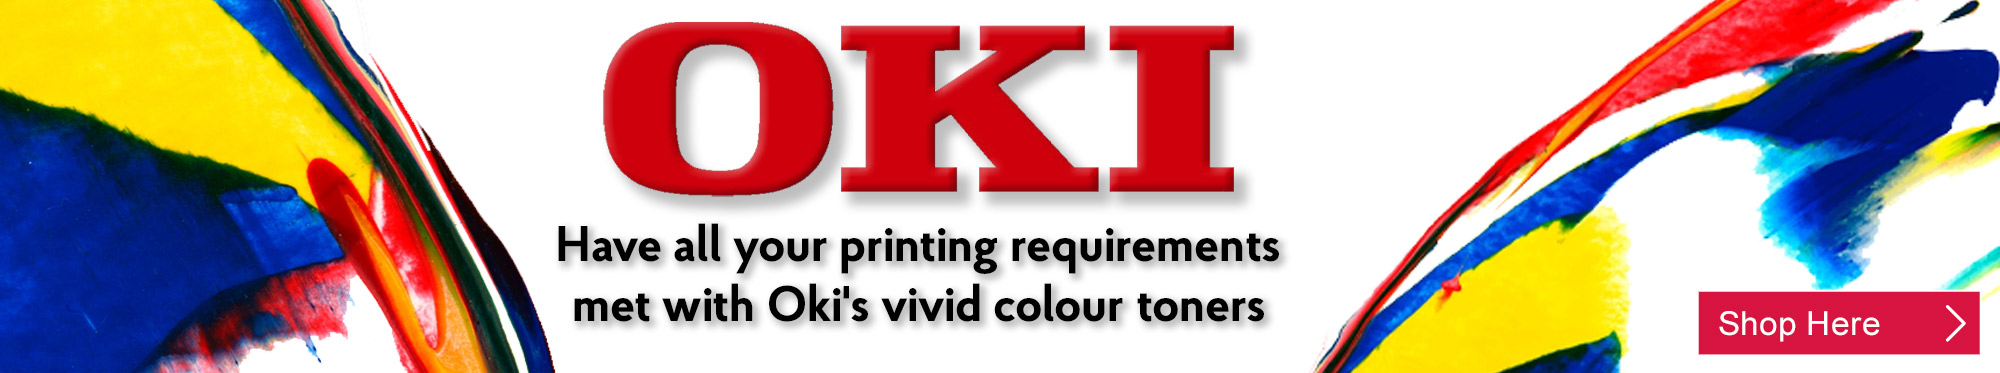 Have All Your Printing Requirements Met With Oki's Vivid Colour Toners